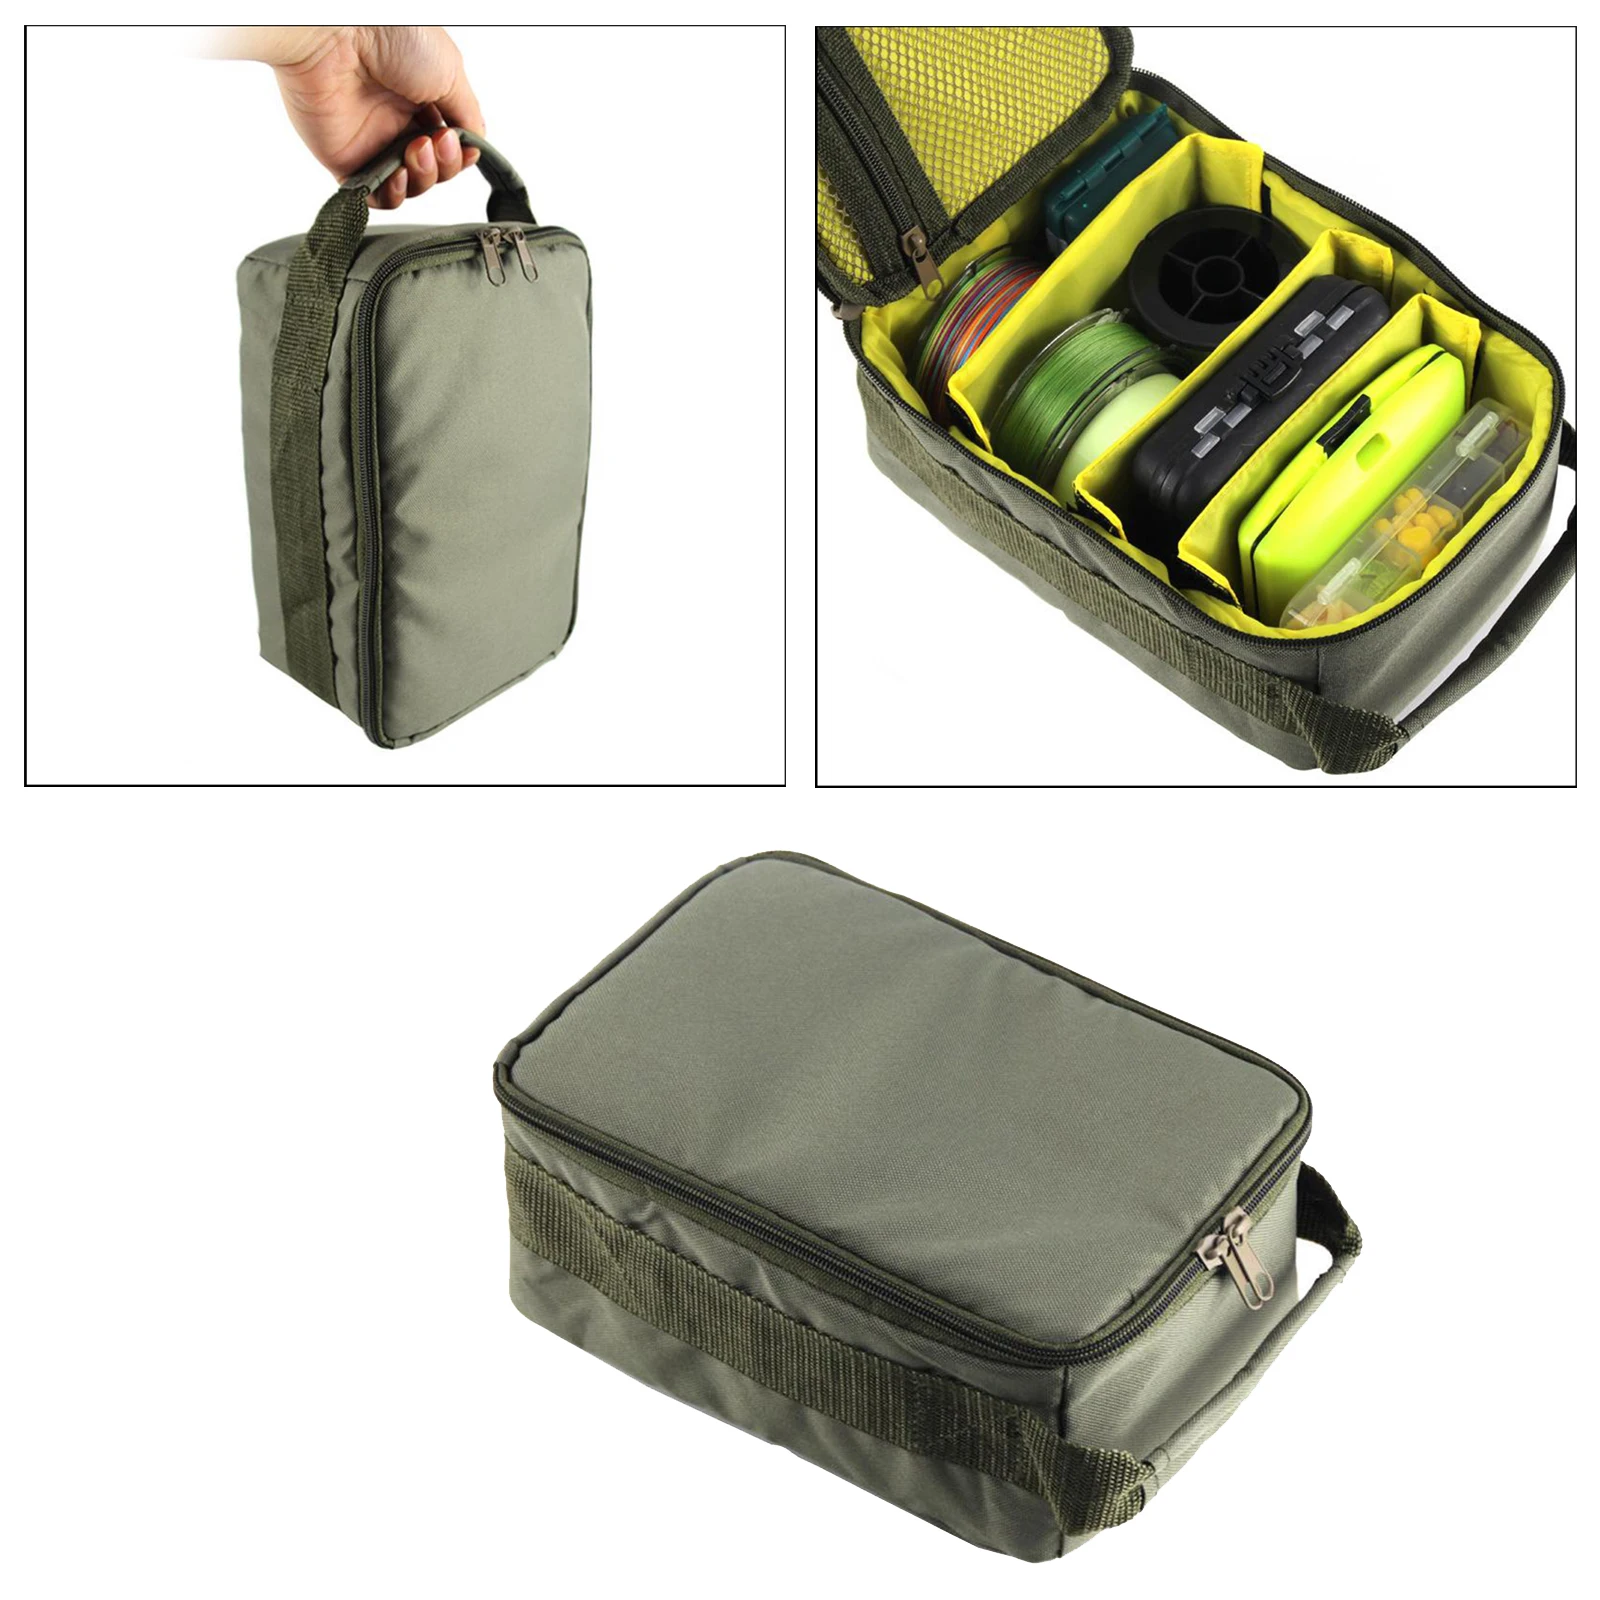 Fishing Tackle Bag Pack Fishing Reel Lure Gears Storage Organizer Pouch Case